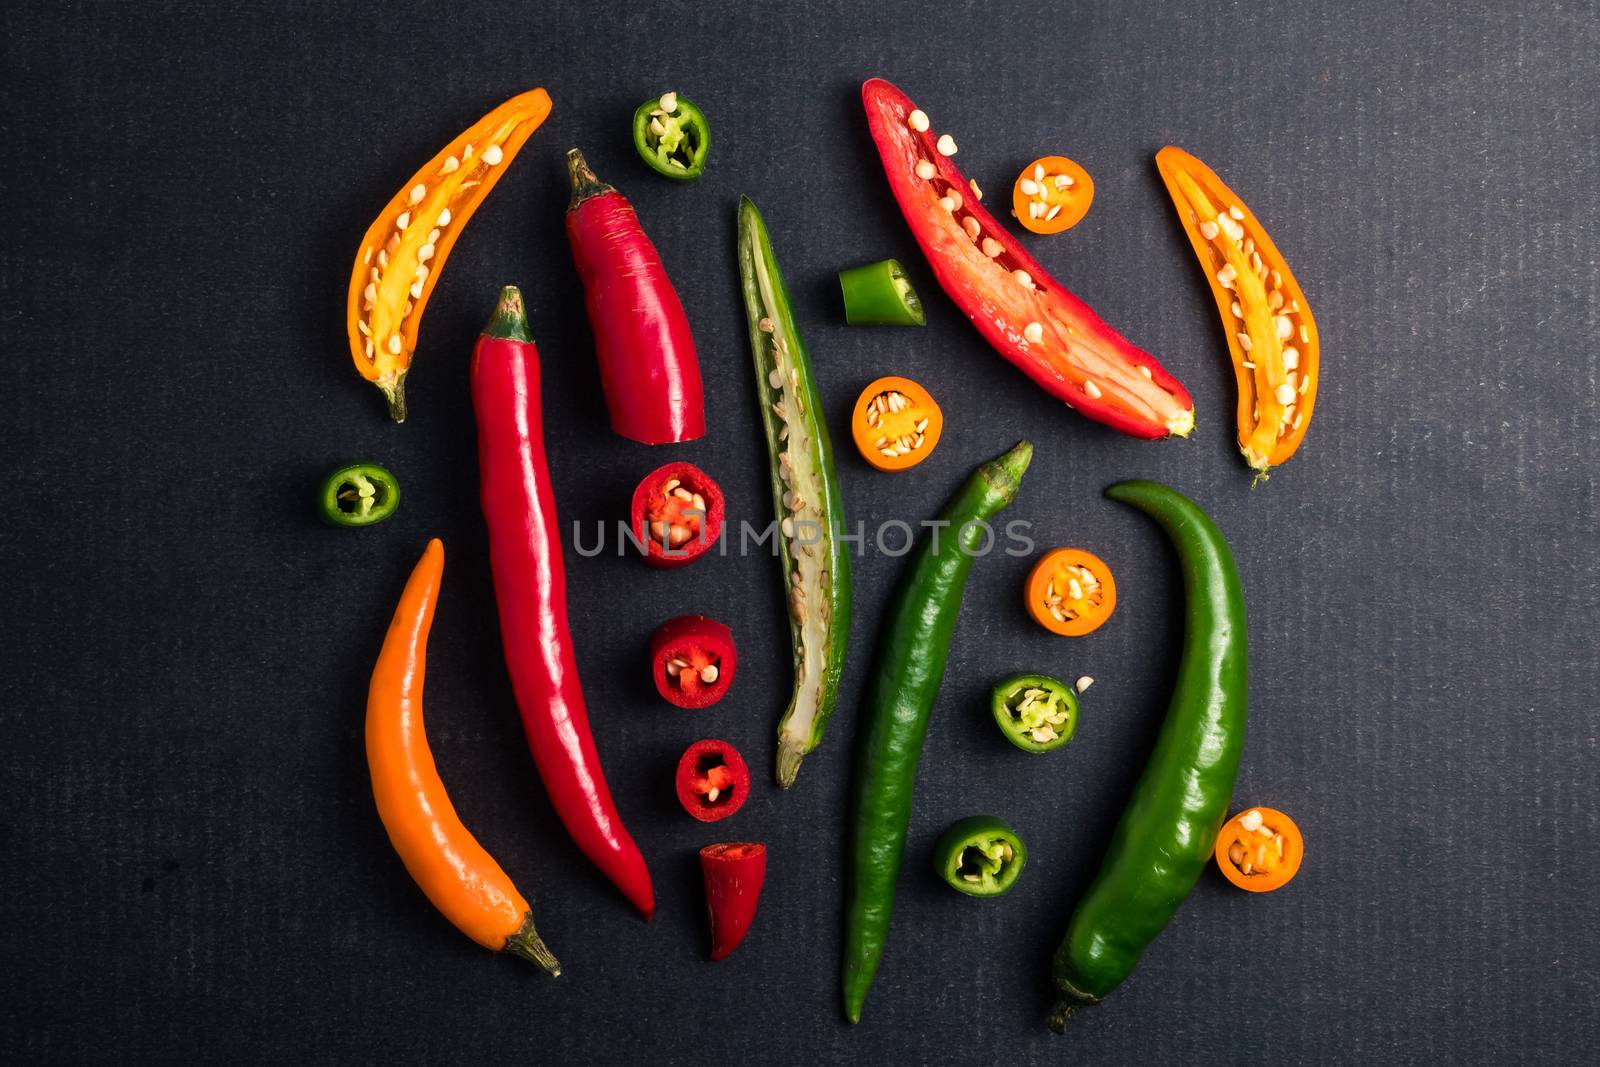 Colorful mix of chili pappers on black background.